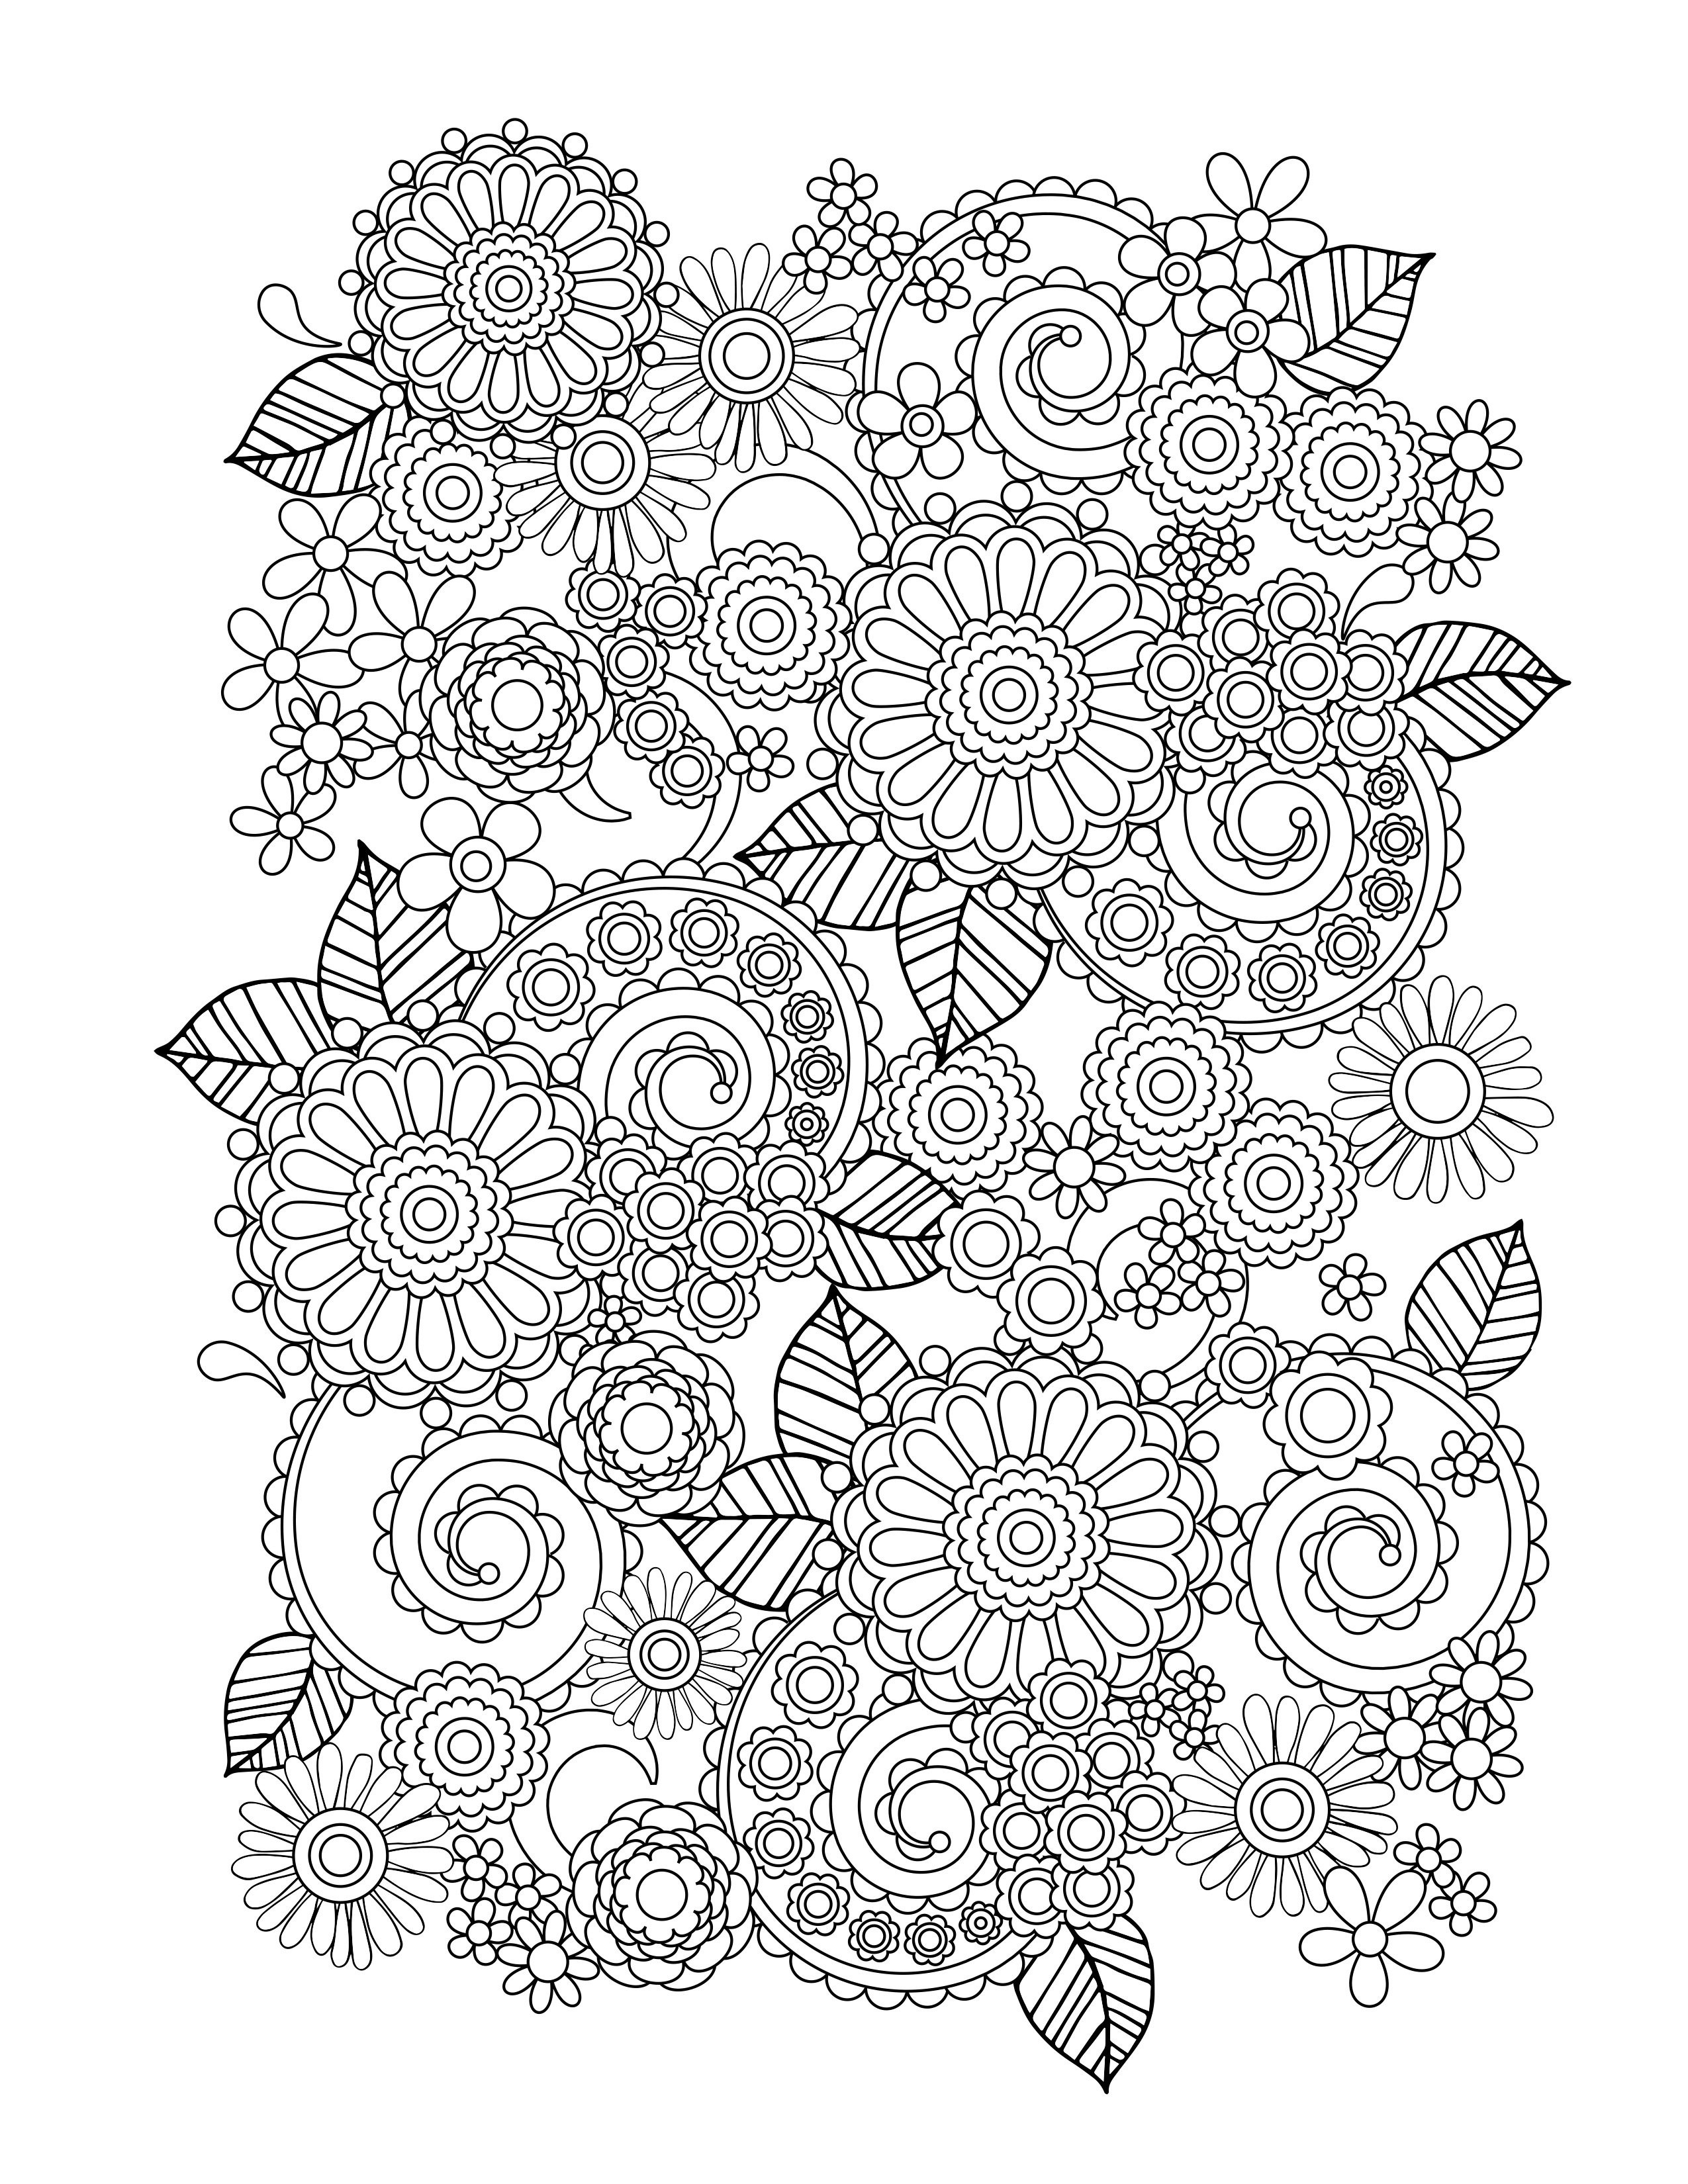 Coloring Book For Adults
 Flower Coloring Pages for Adults Best Coloring Pages For